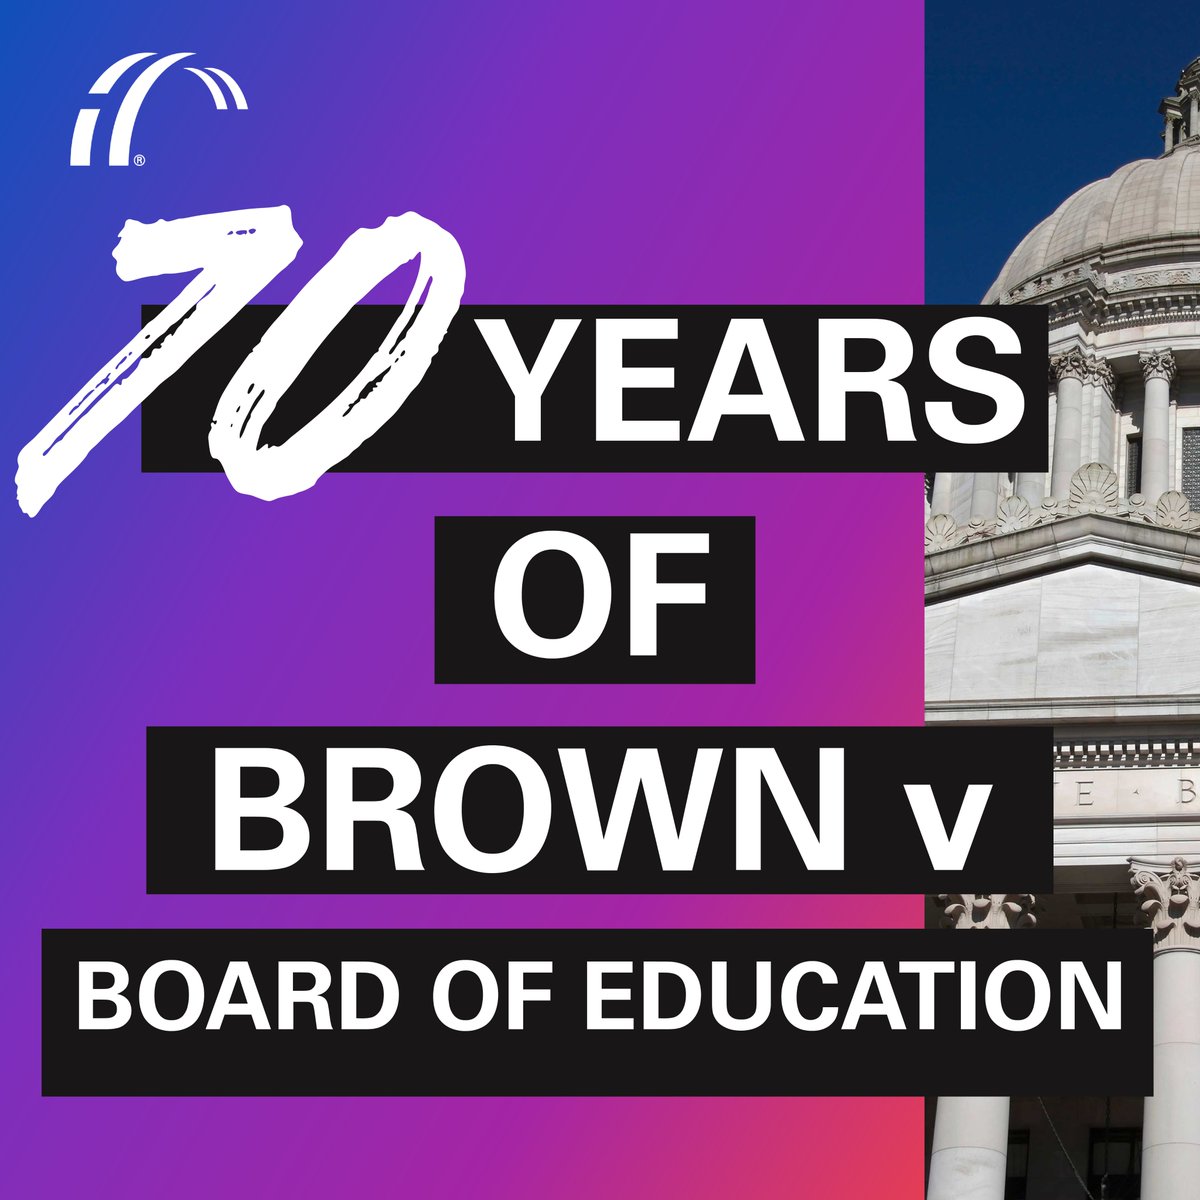 As we celebrate 70 years of Brown v. Board of Education, AAUW renews our commitment to the principles of equality and democracy. To help achieve full equality, Congress must act & pass the John Lewis Voting Rights Act! #BrownvBoard70 aauw.org/act/two-minute…